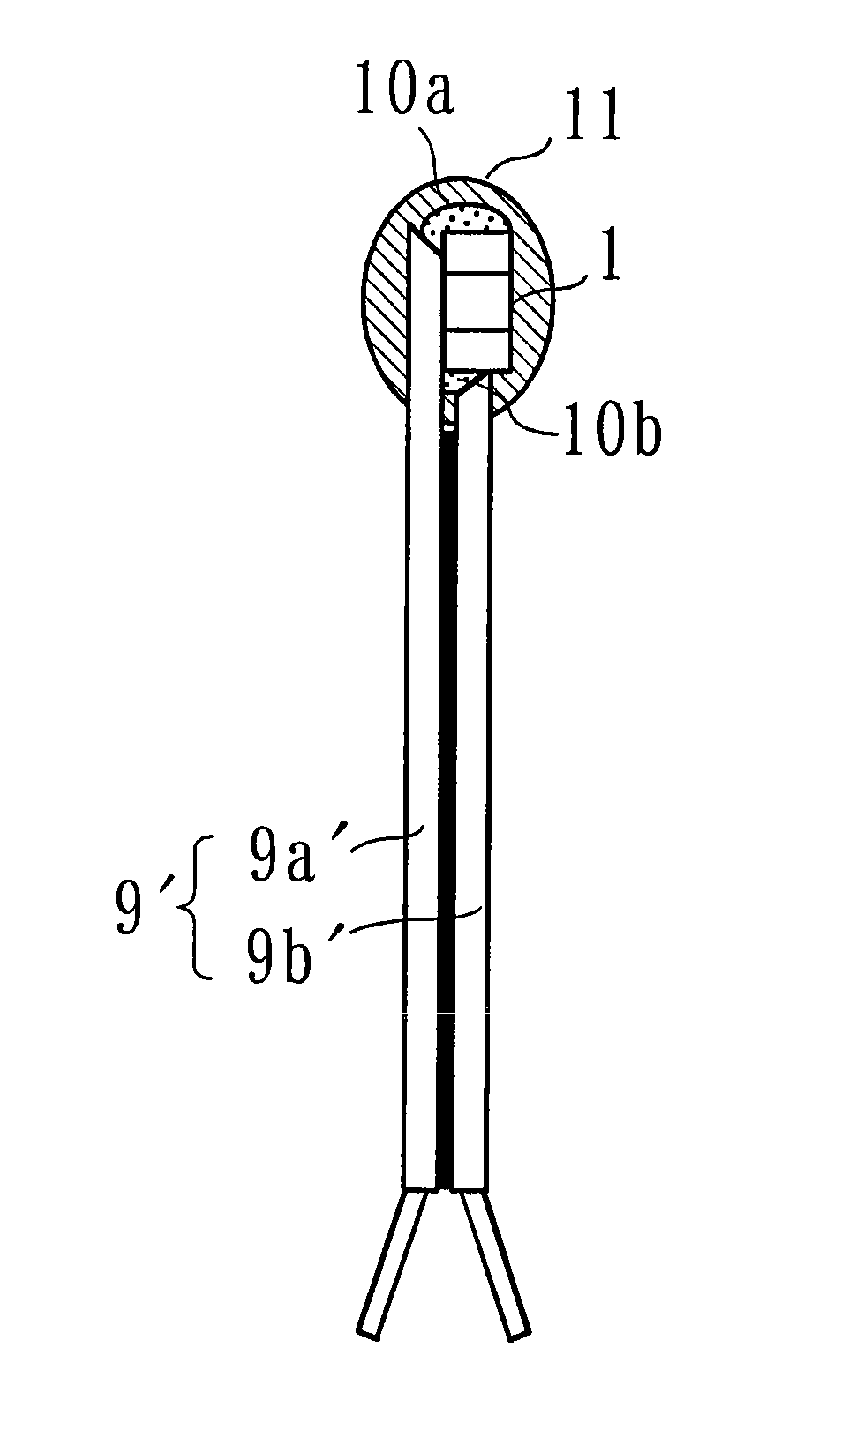 Temperature sensor with leads